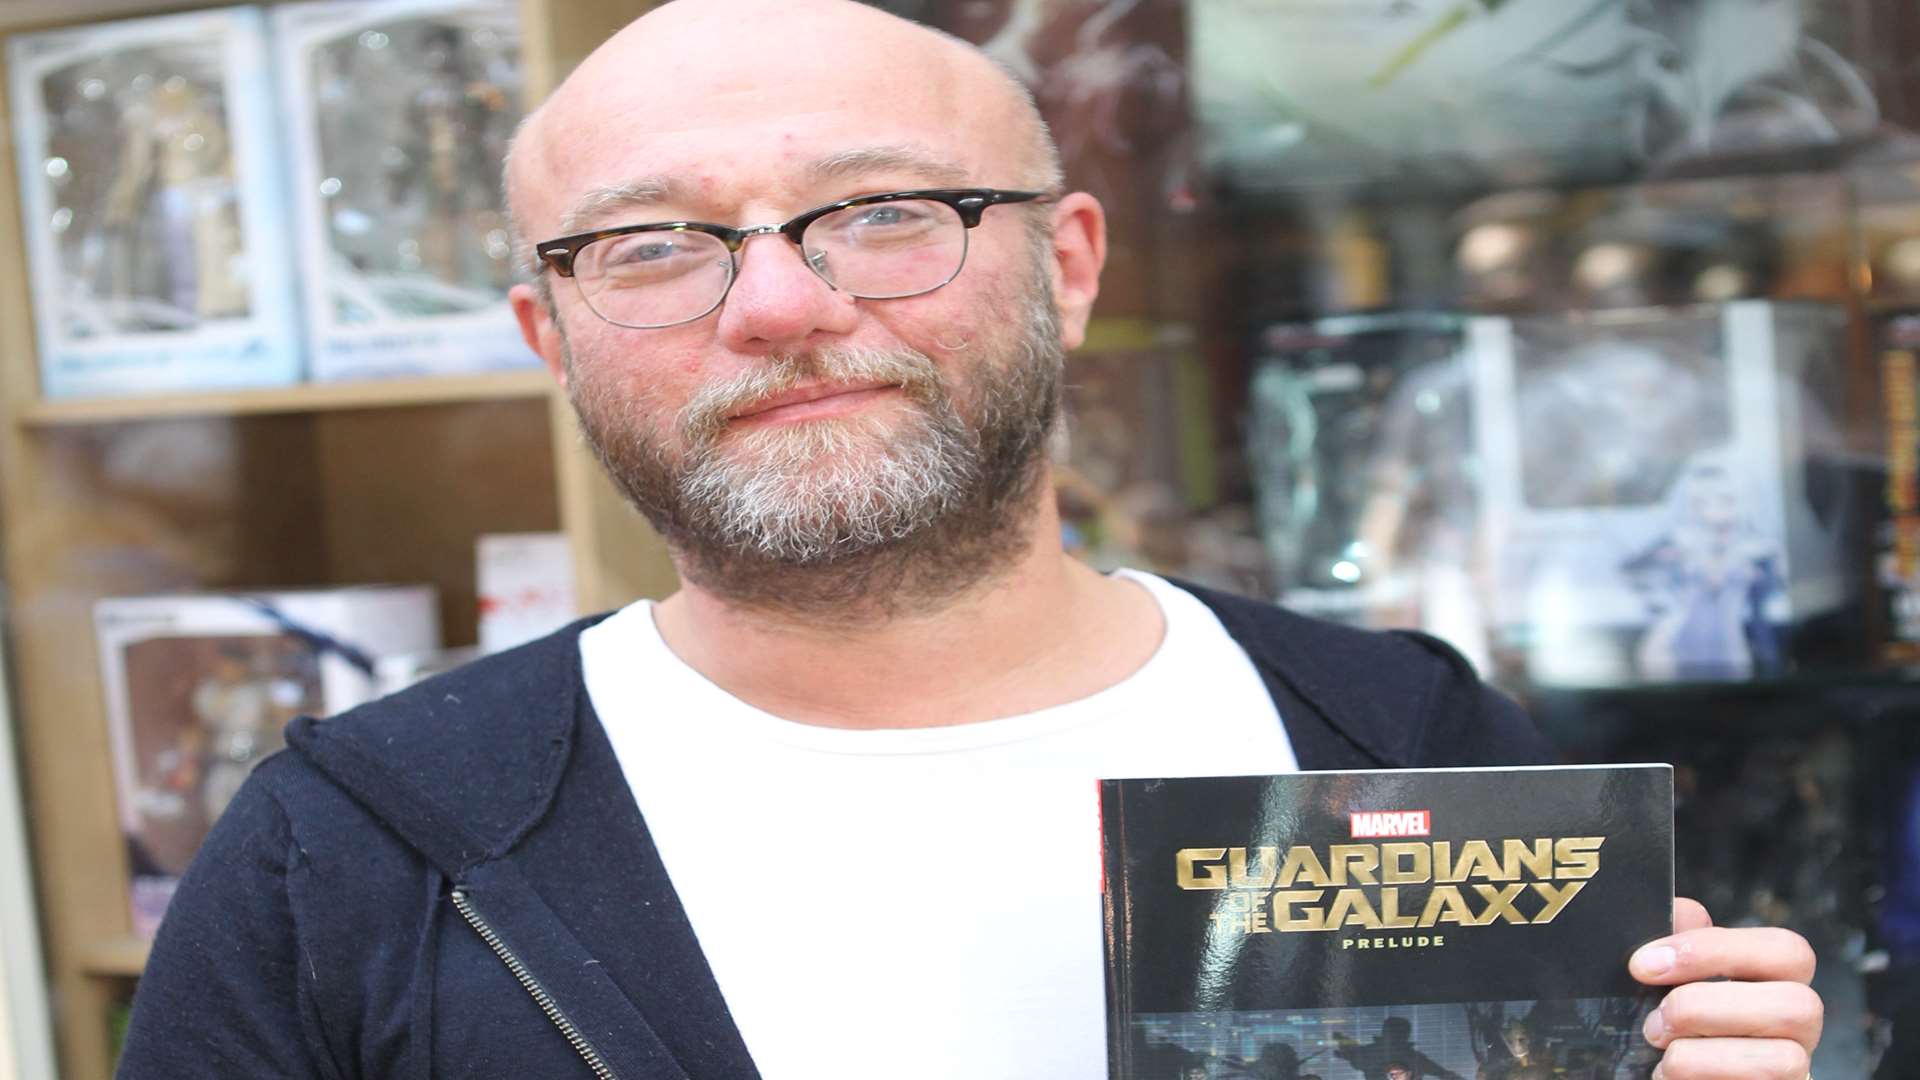 Dan Abnett's comic book inspired the movie Guardians of the Galaxy